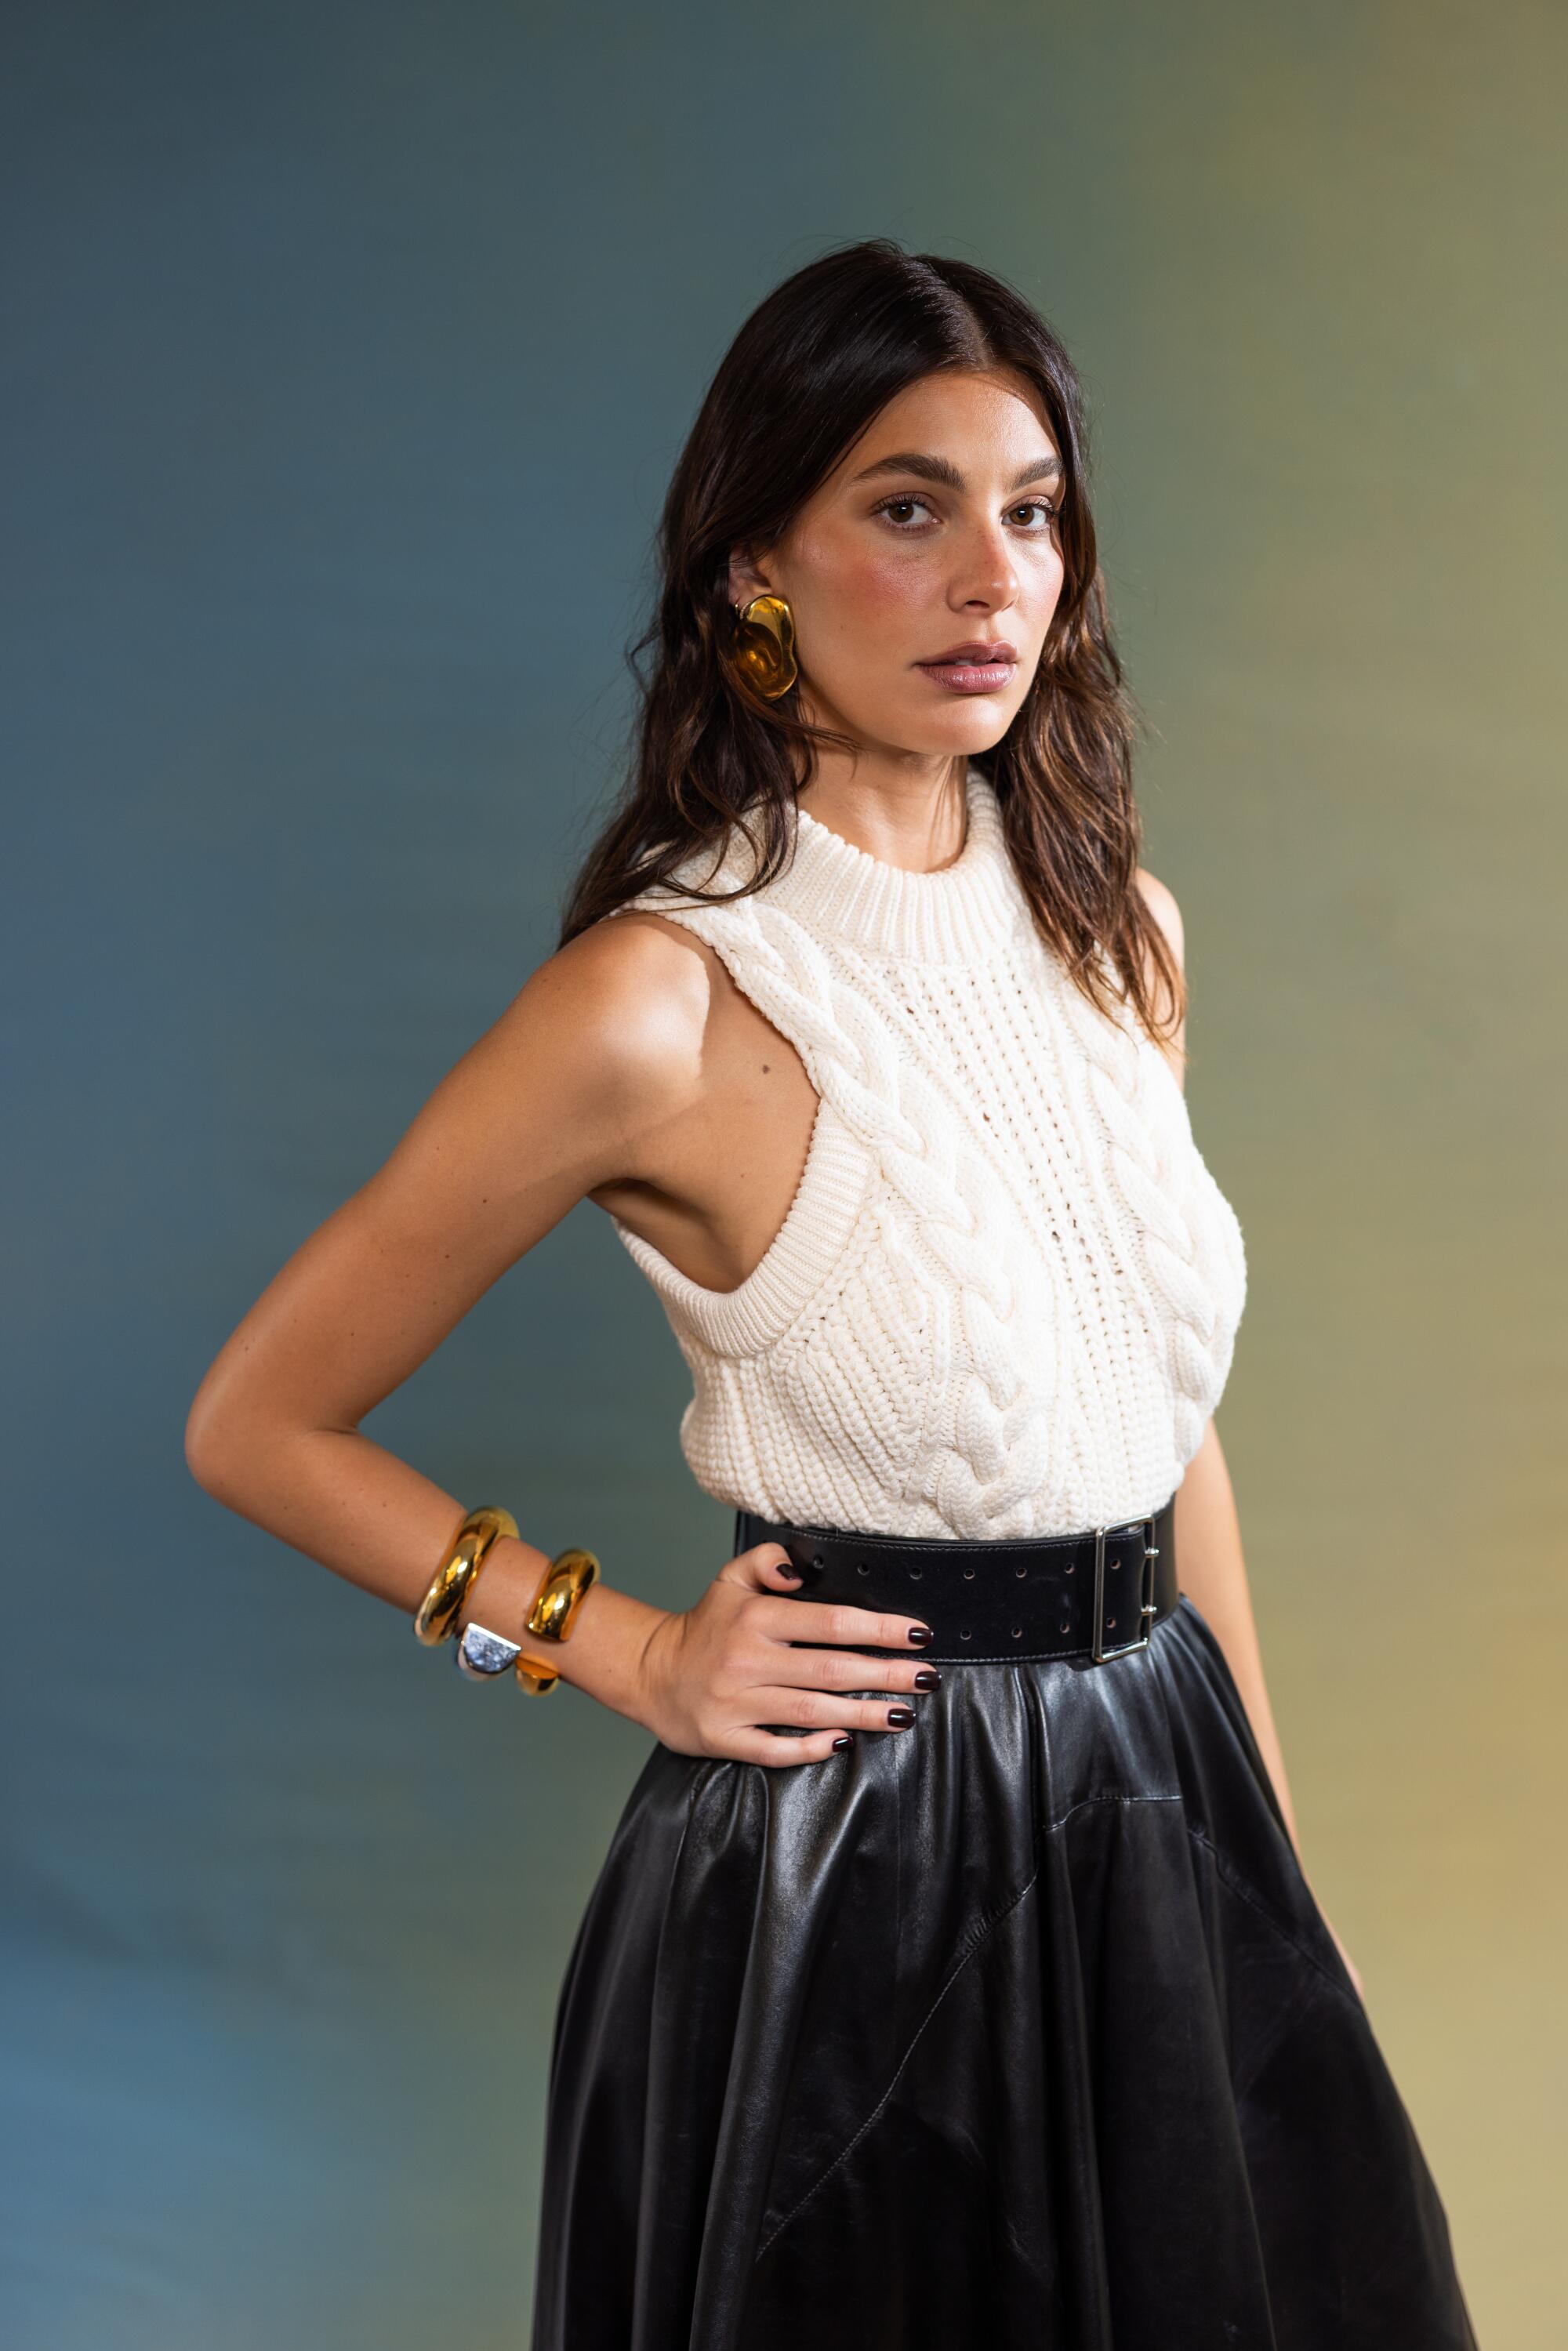 Camila Morrone in a sleeveless sweater and black skirt and a hand on her waist.